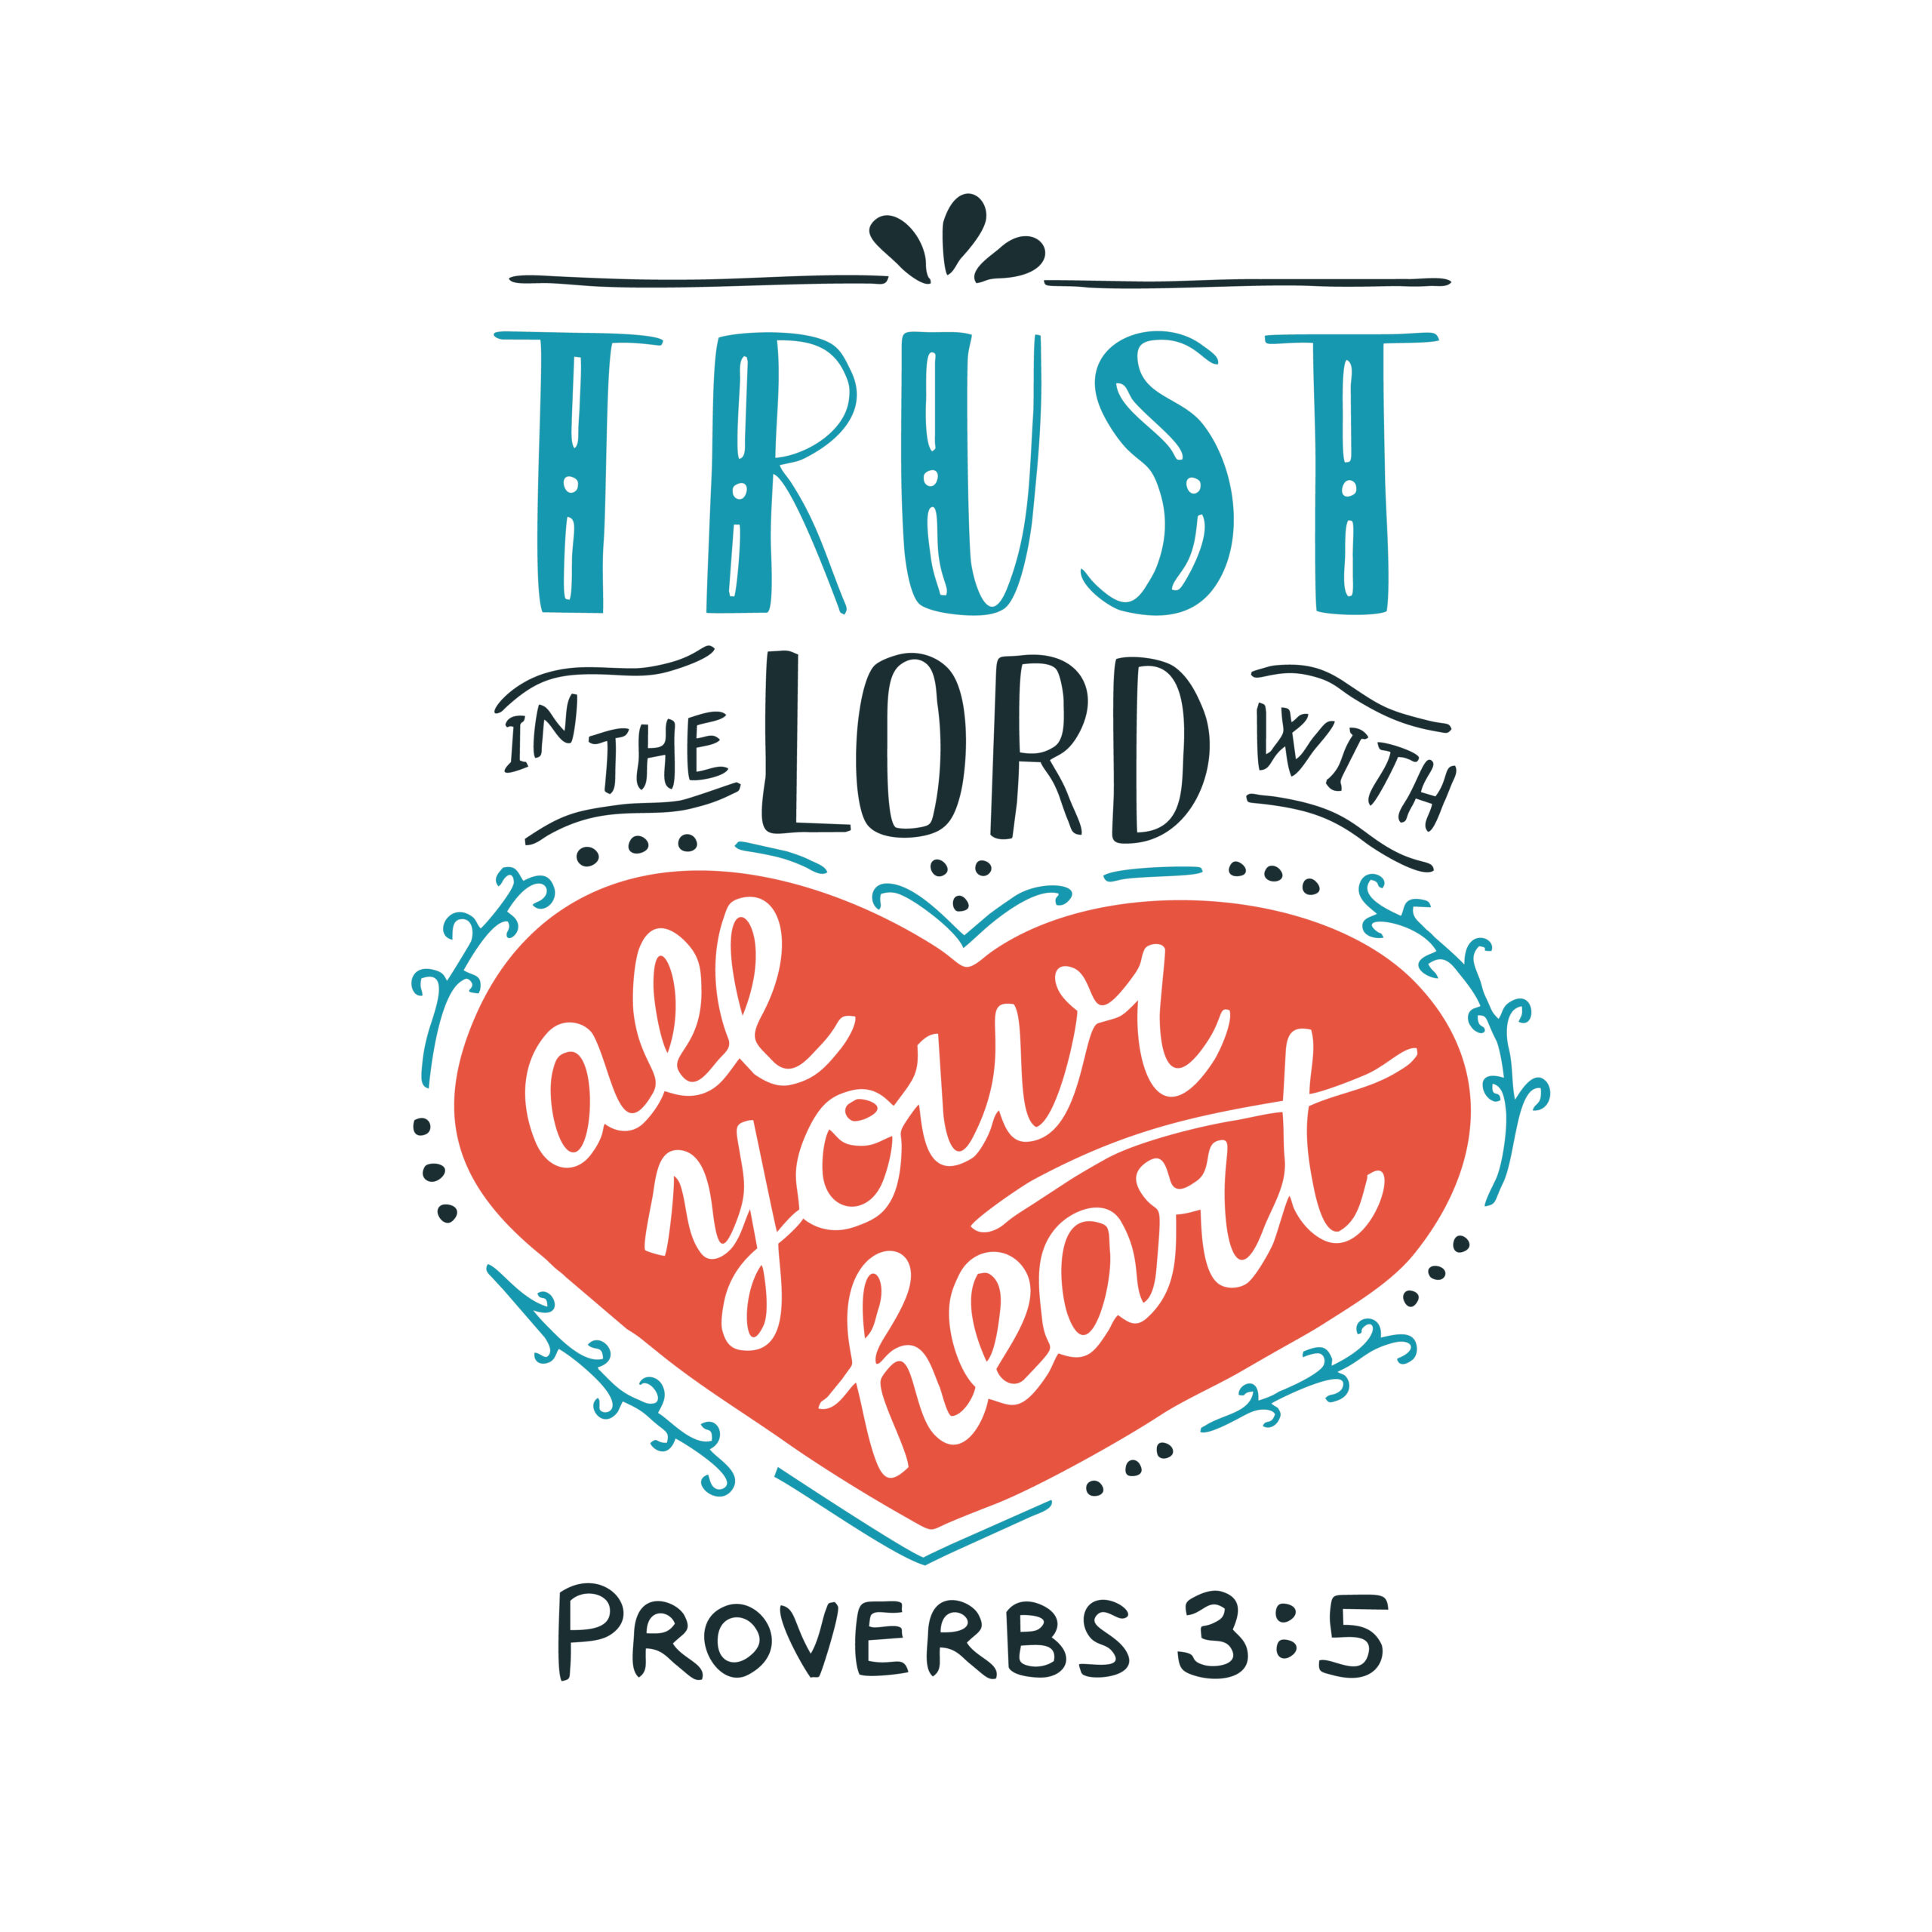 What does it mean to trust God with all your heart?